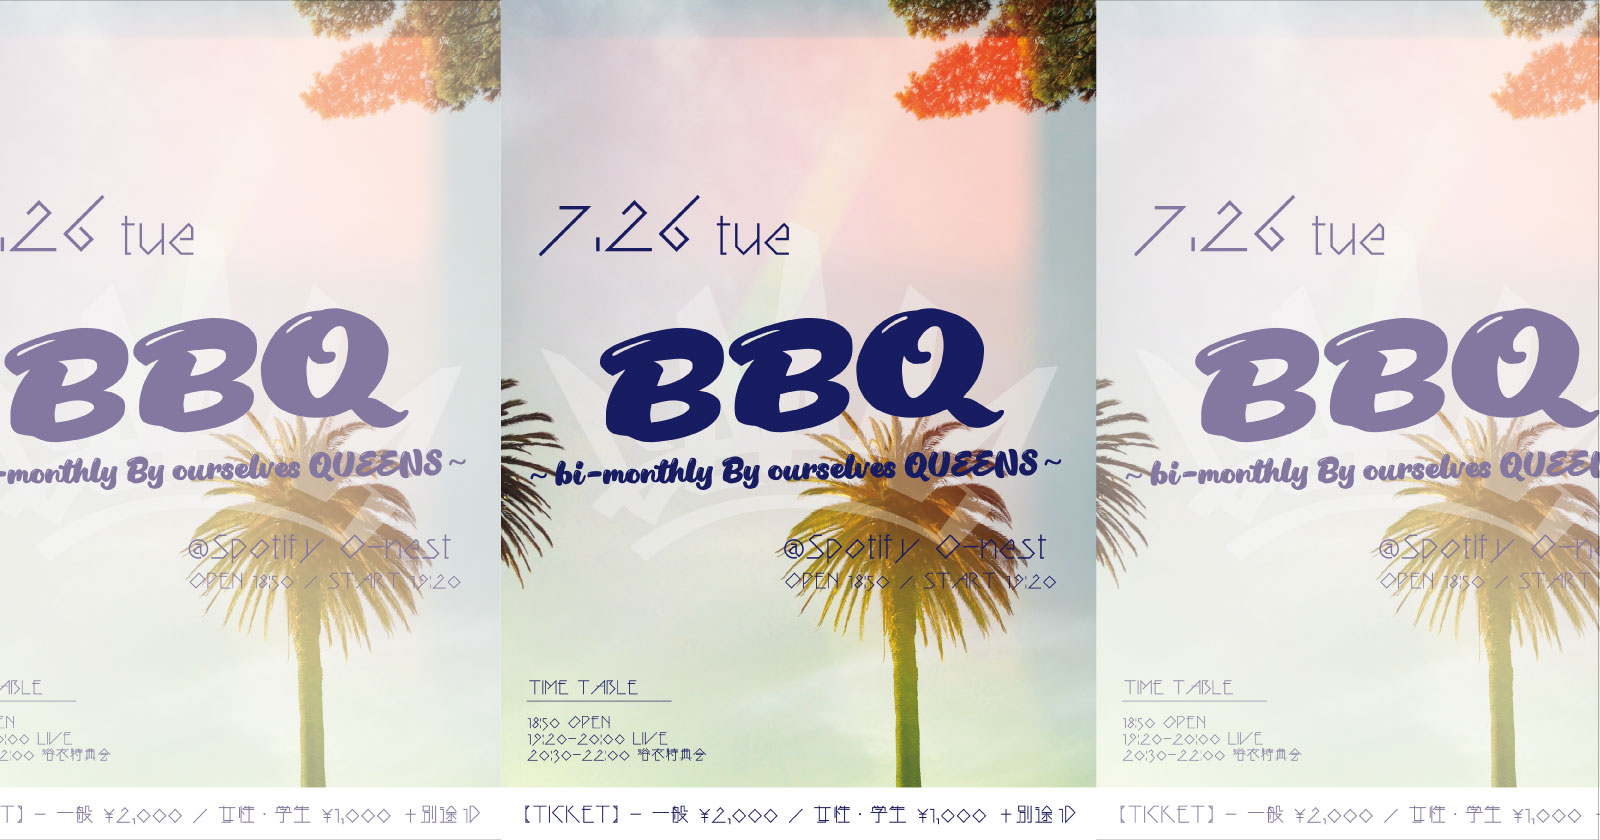 QUEENS定期公演「BBQ ~bi-monthly By ourselves QUEENS~」